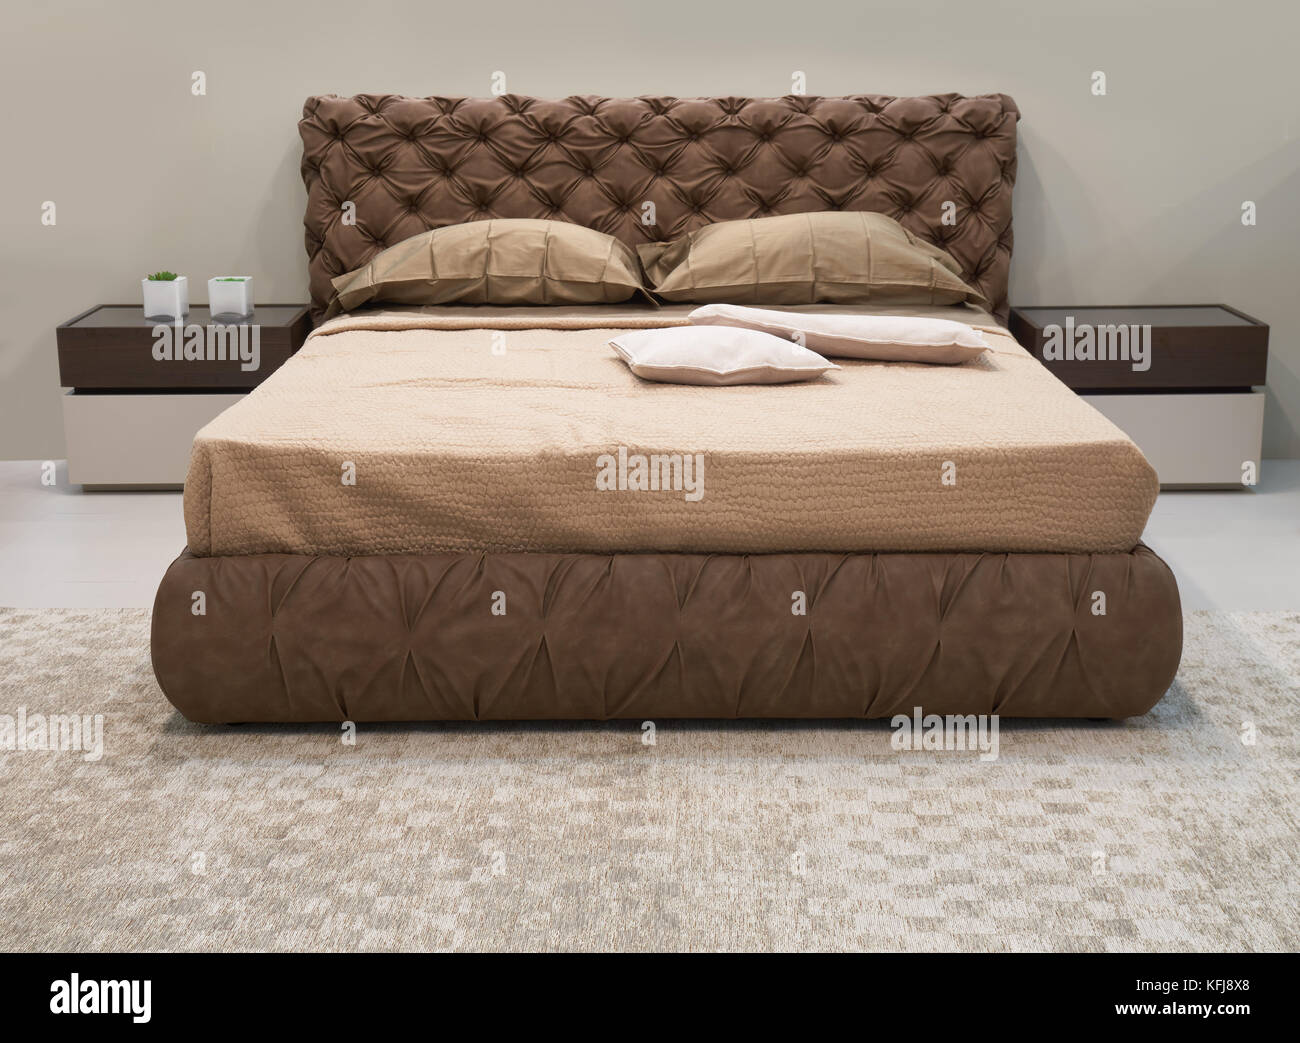 New brown double bed in the bedroom Stock Photo - Alamy